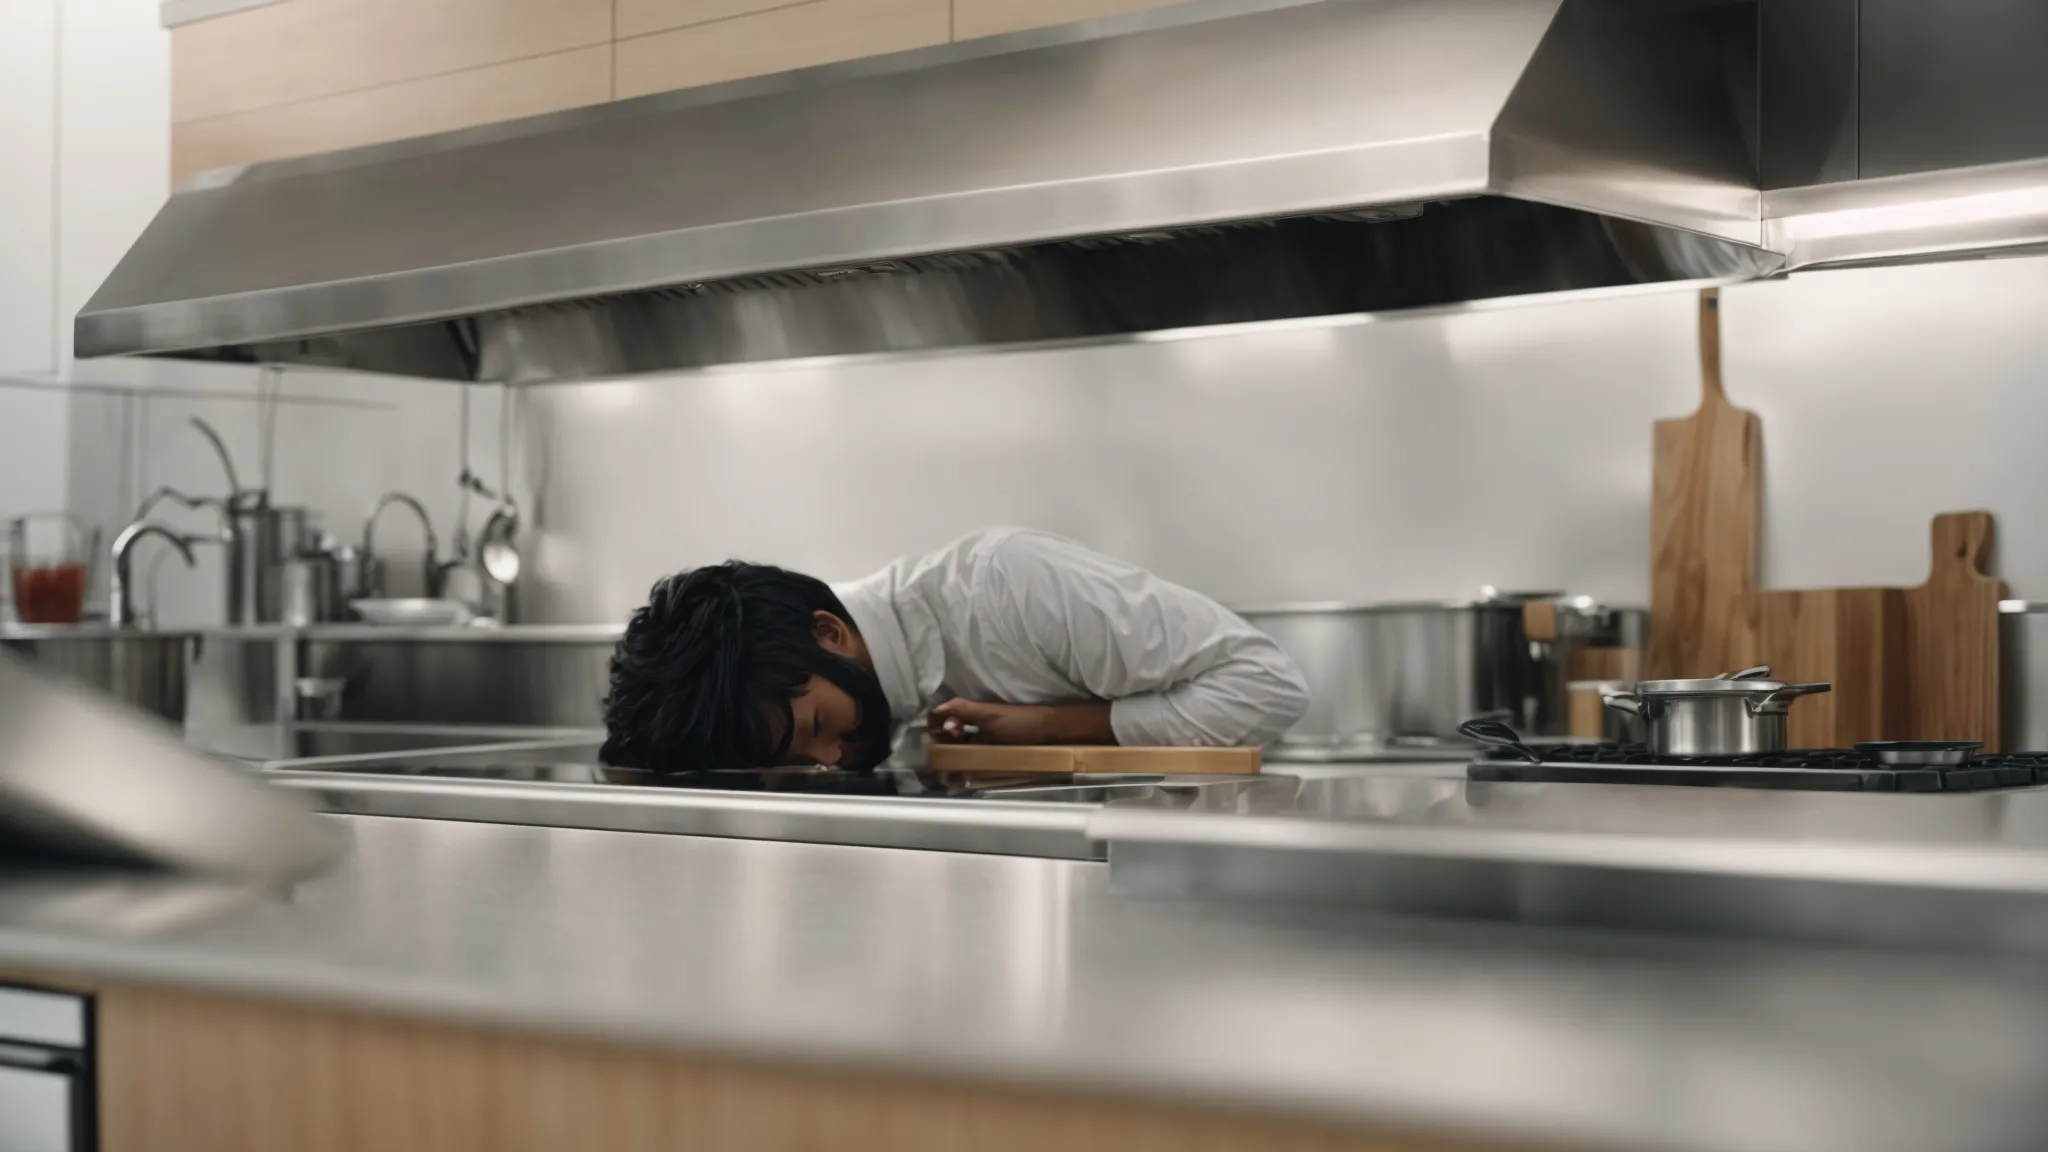 a person wipes down a stainless-steel kitchen hood, embodying a routine of cleanliness.